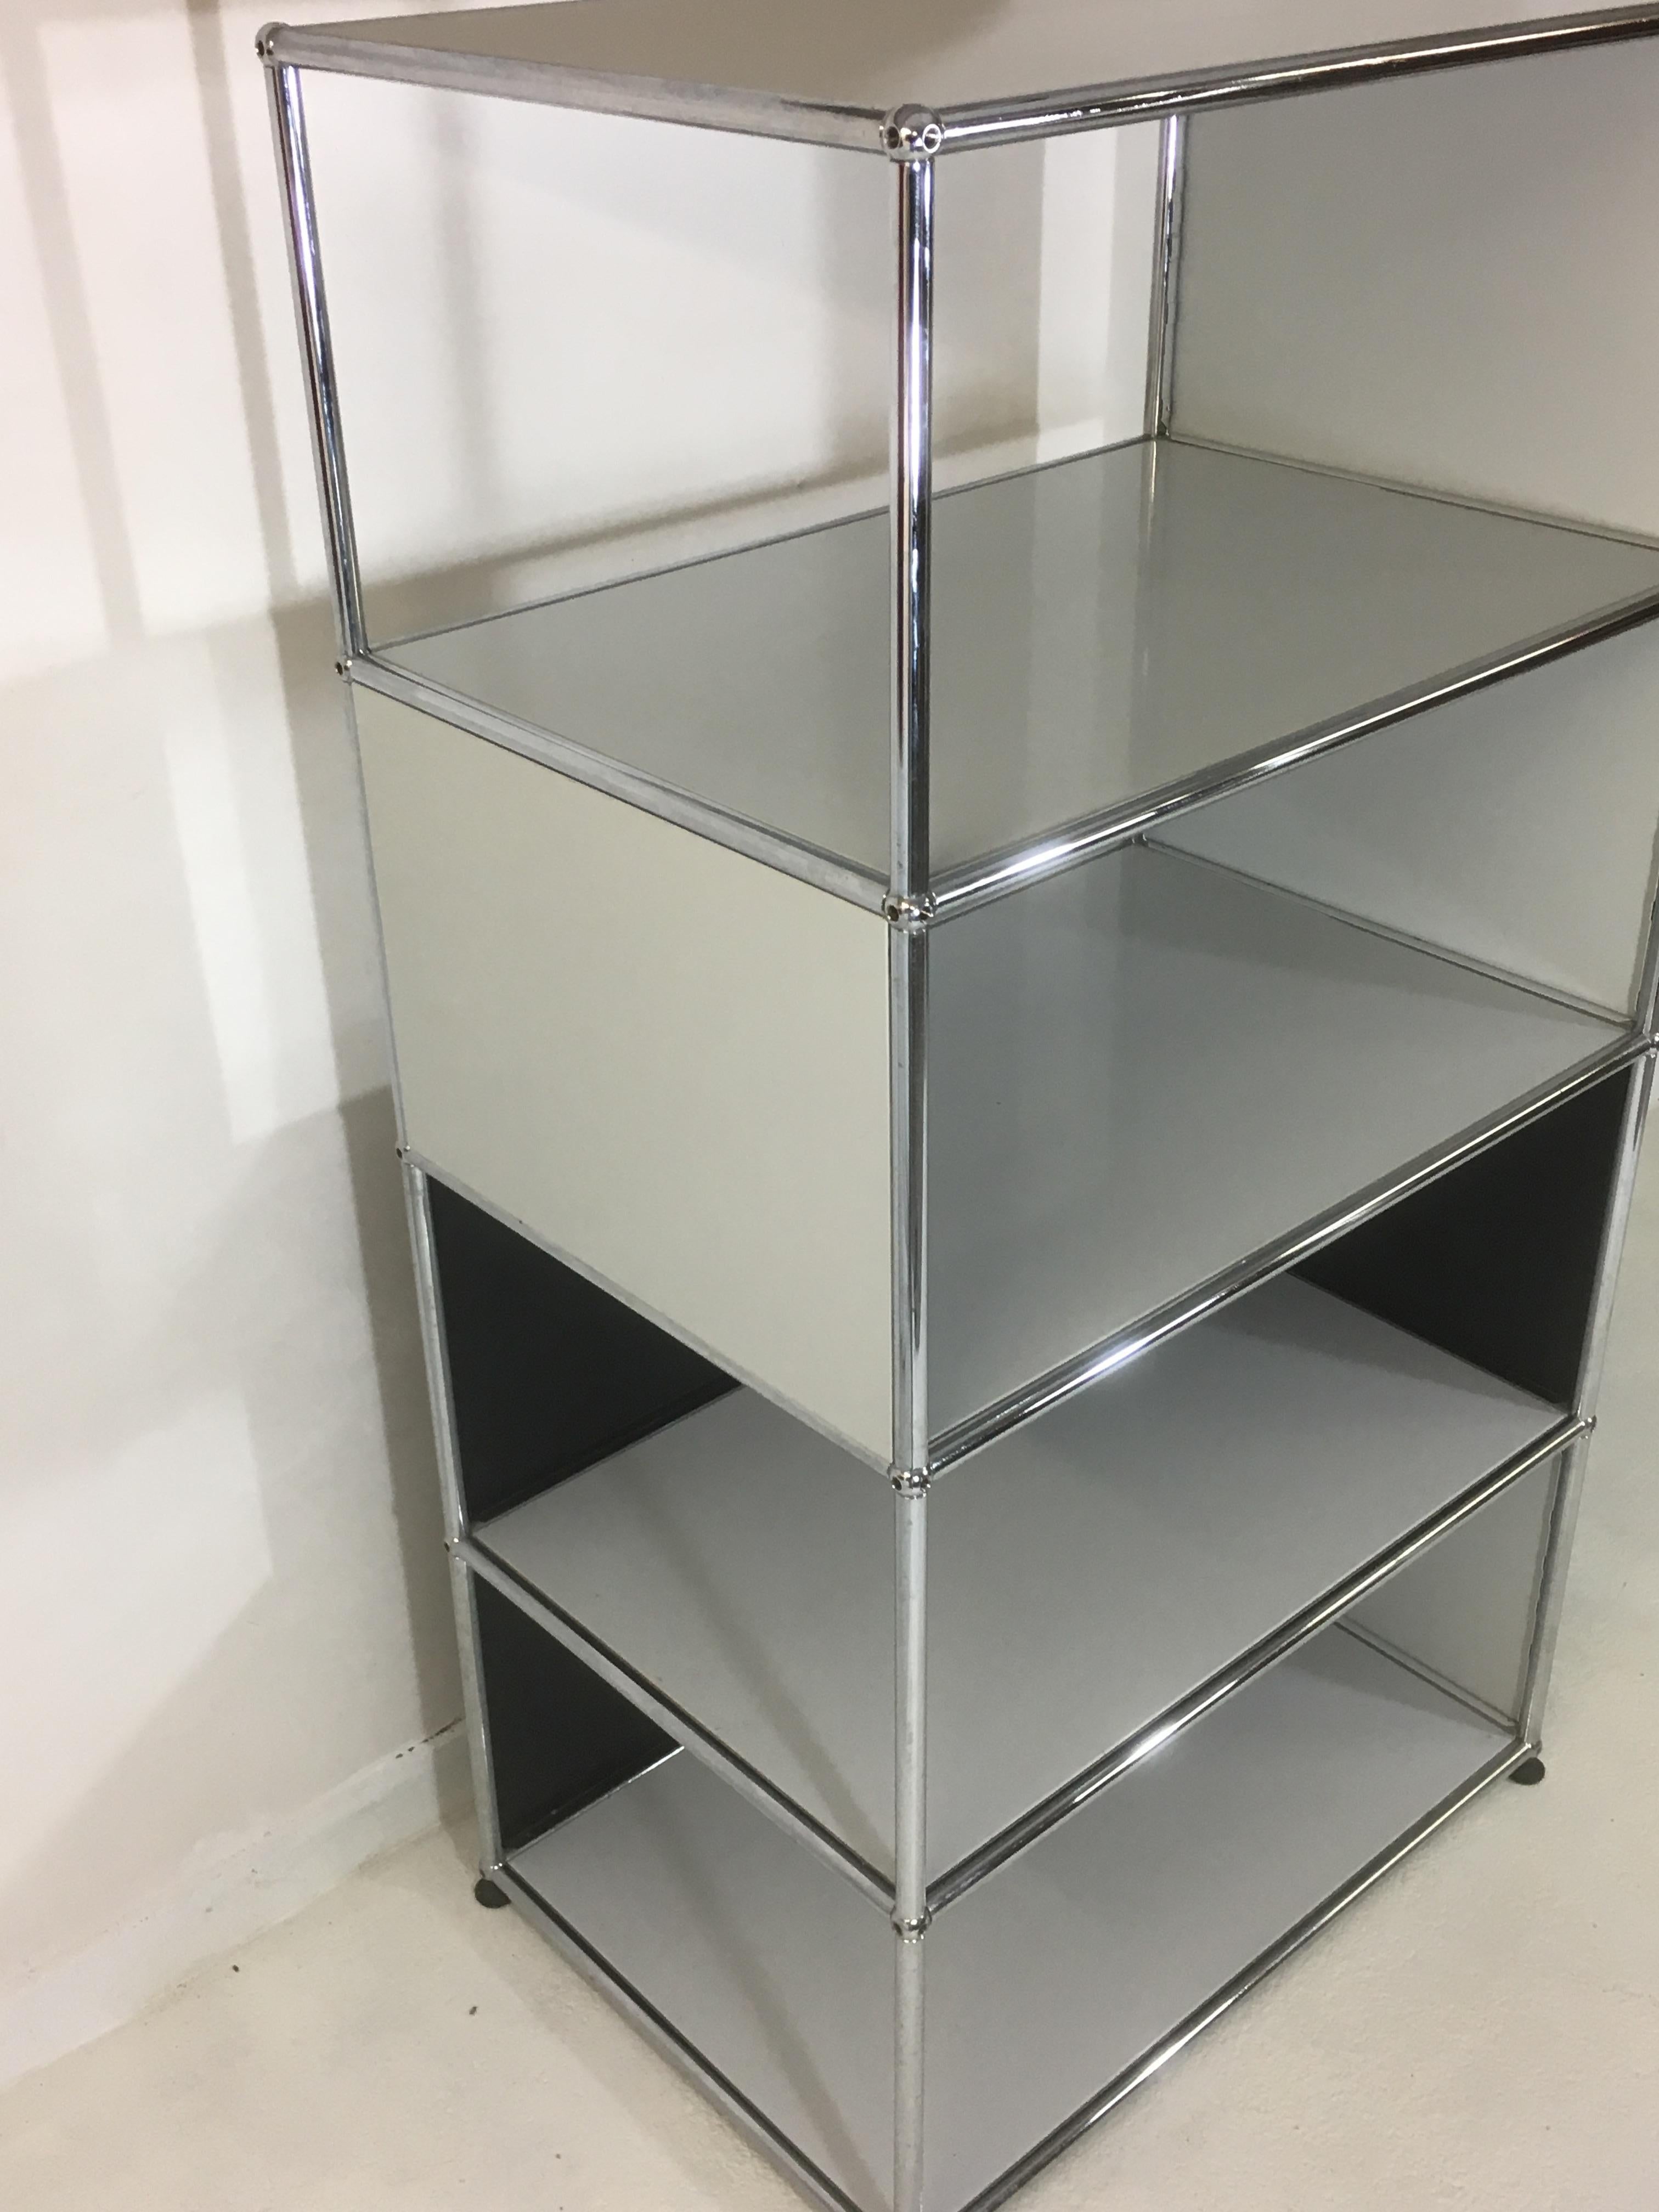 Swiss Usm Haller Storage Unit White, Grey and Stainless Steel Designed by Fritz Haller For Sale